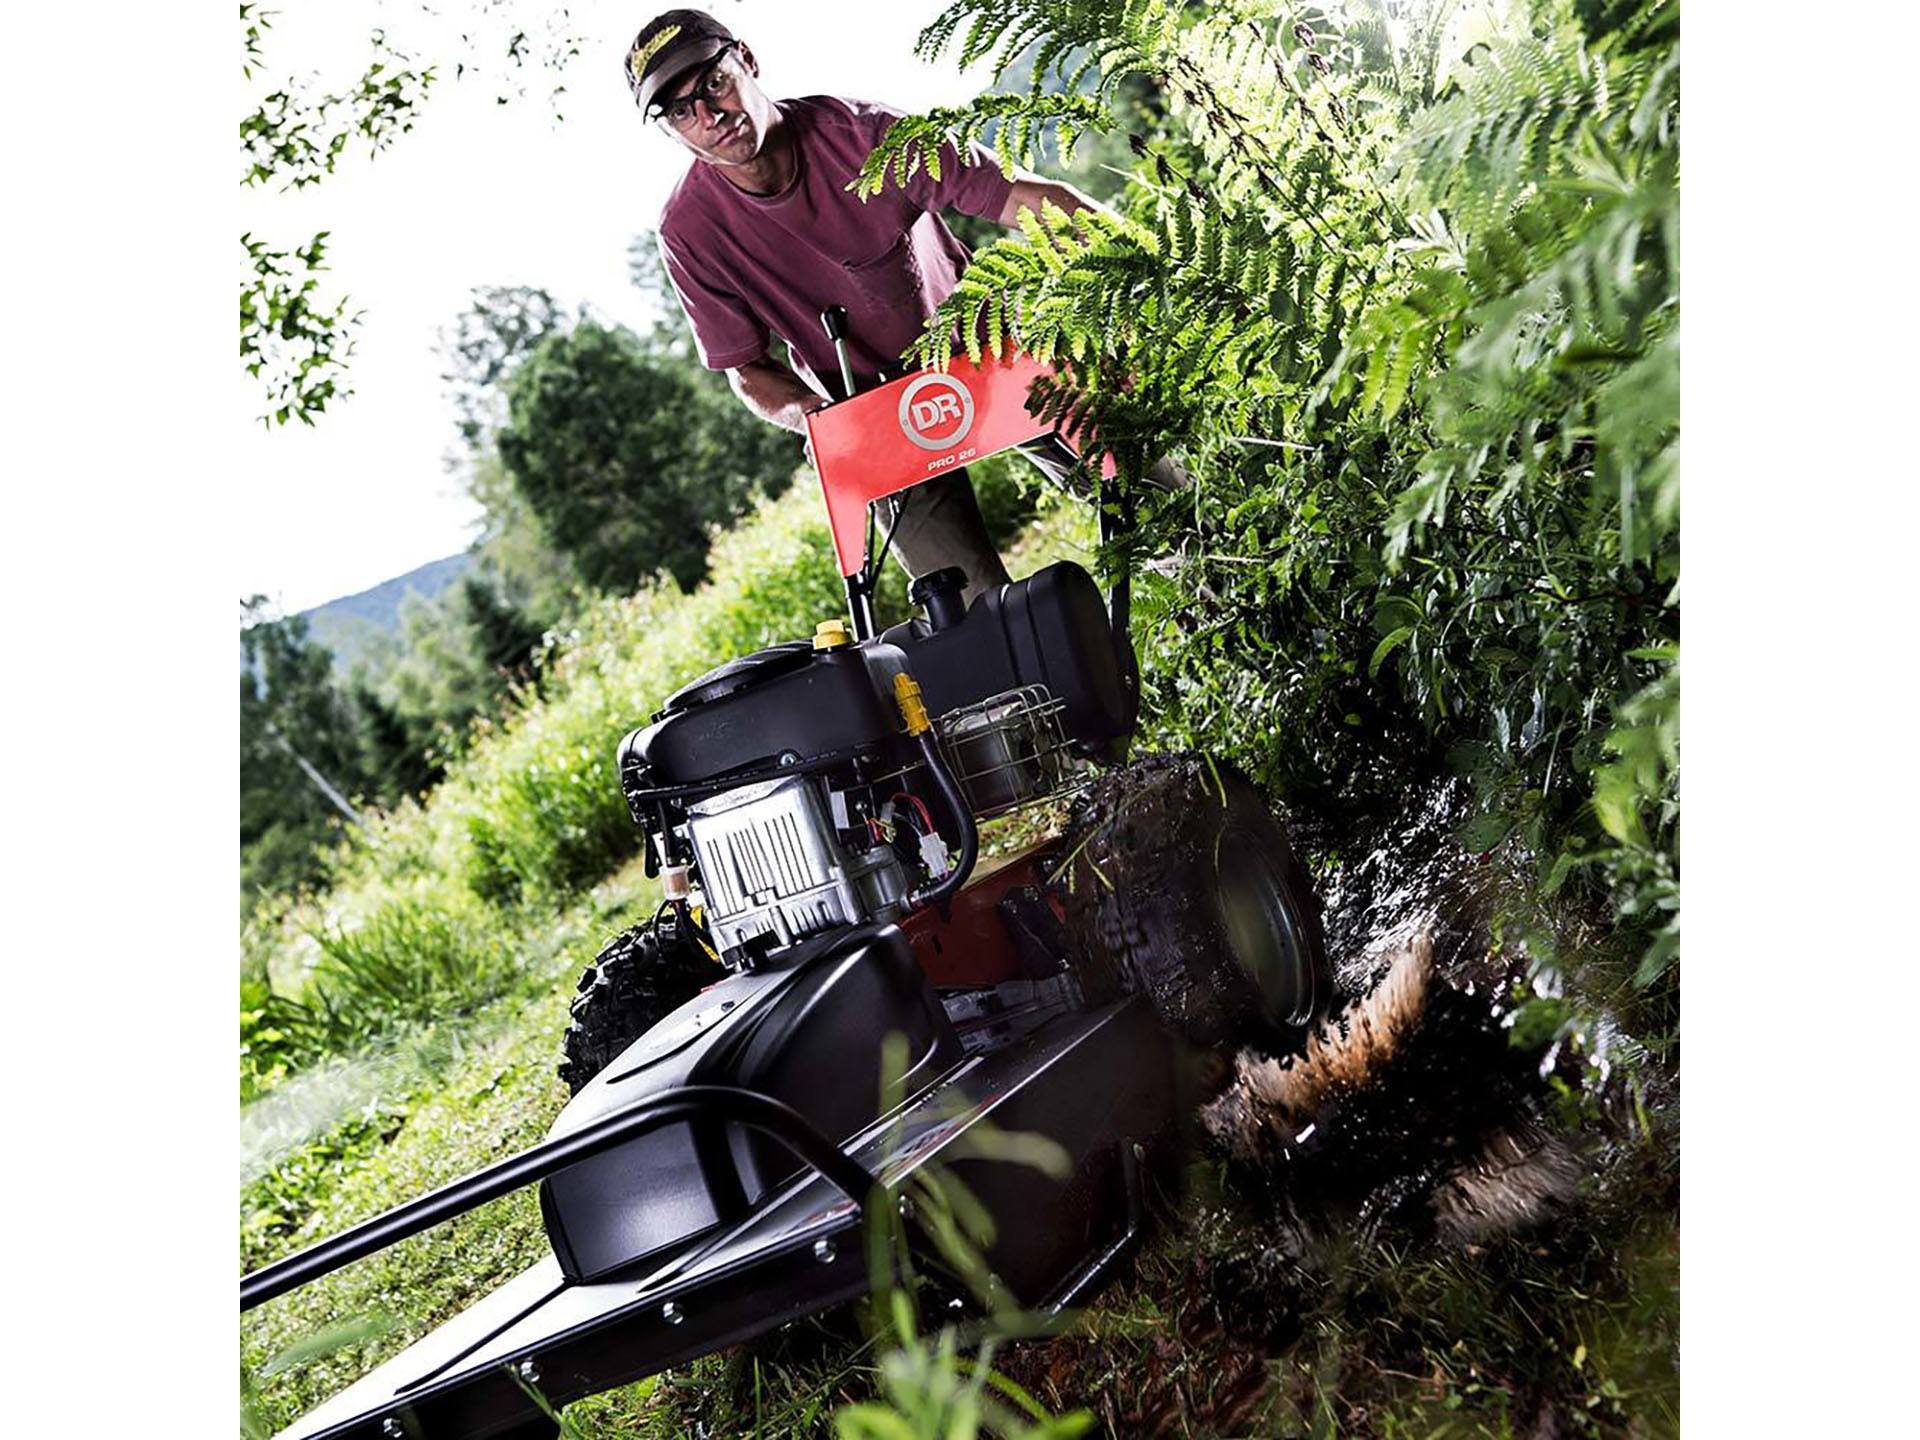 DR Power Equipment Pro 26 in. Briggs & Stratton 15.5 hp in Saint Helens, Oregon - Photo 4